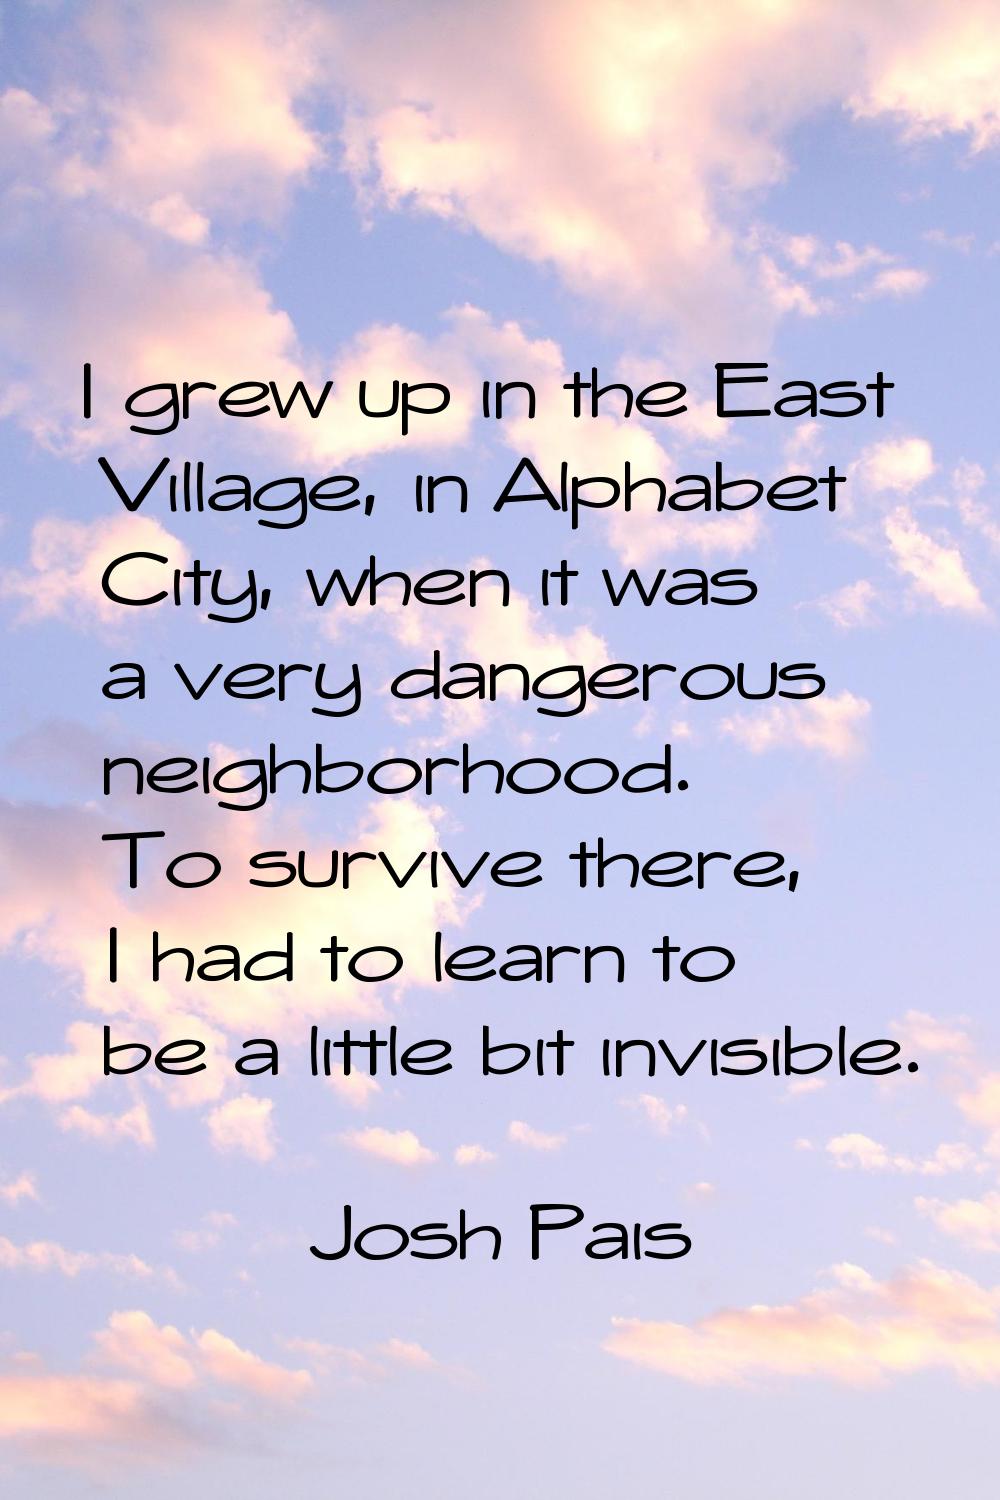 I grew up in the East Village, in Alphabet City, when it was a very dangerous neighborhood. To surv